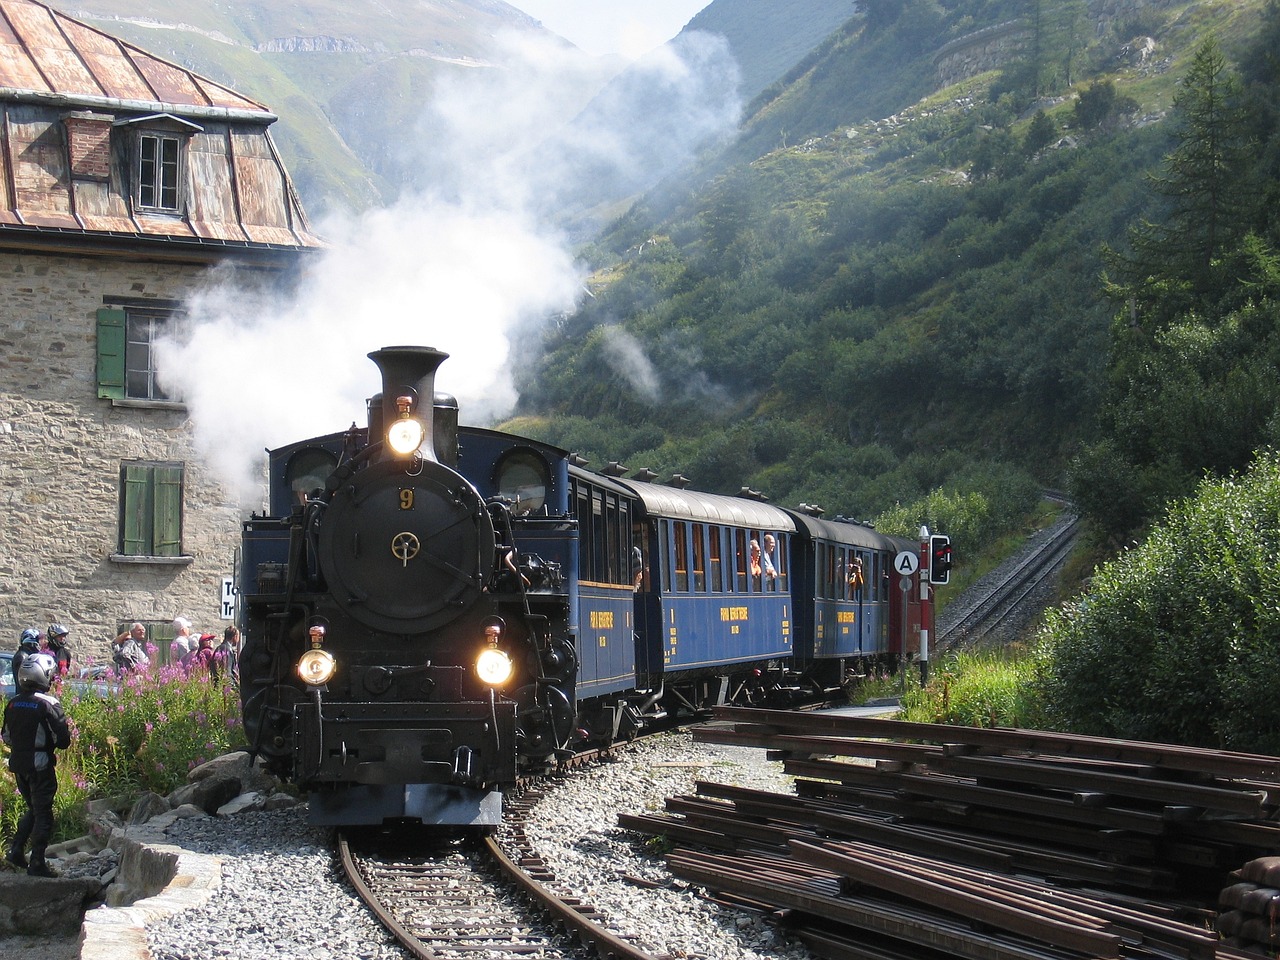 a train traveling down train tracks next to a building, by Werner Andermatt, a steam wheeler from 1880s, in the mountains, indigo, wikimedia